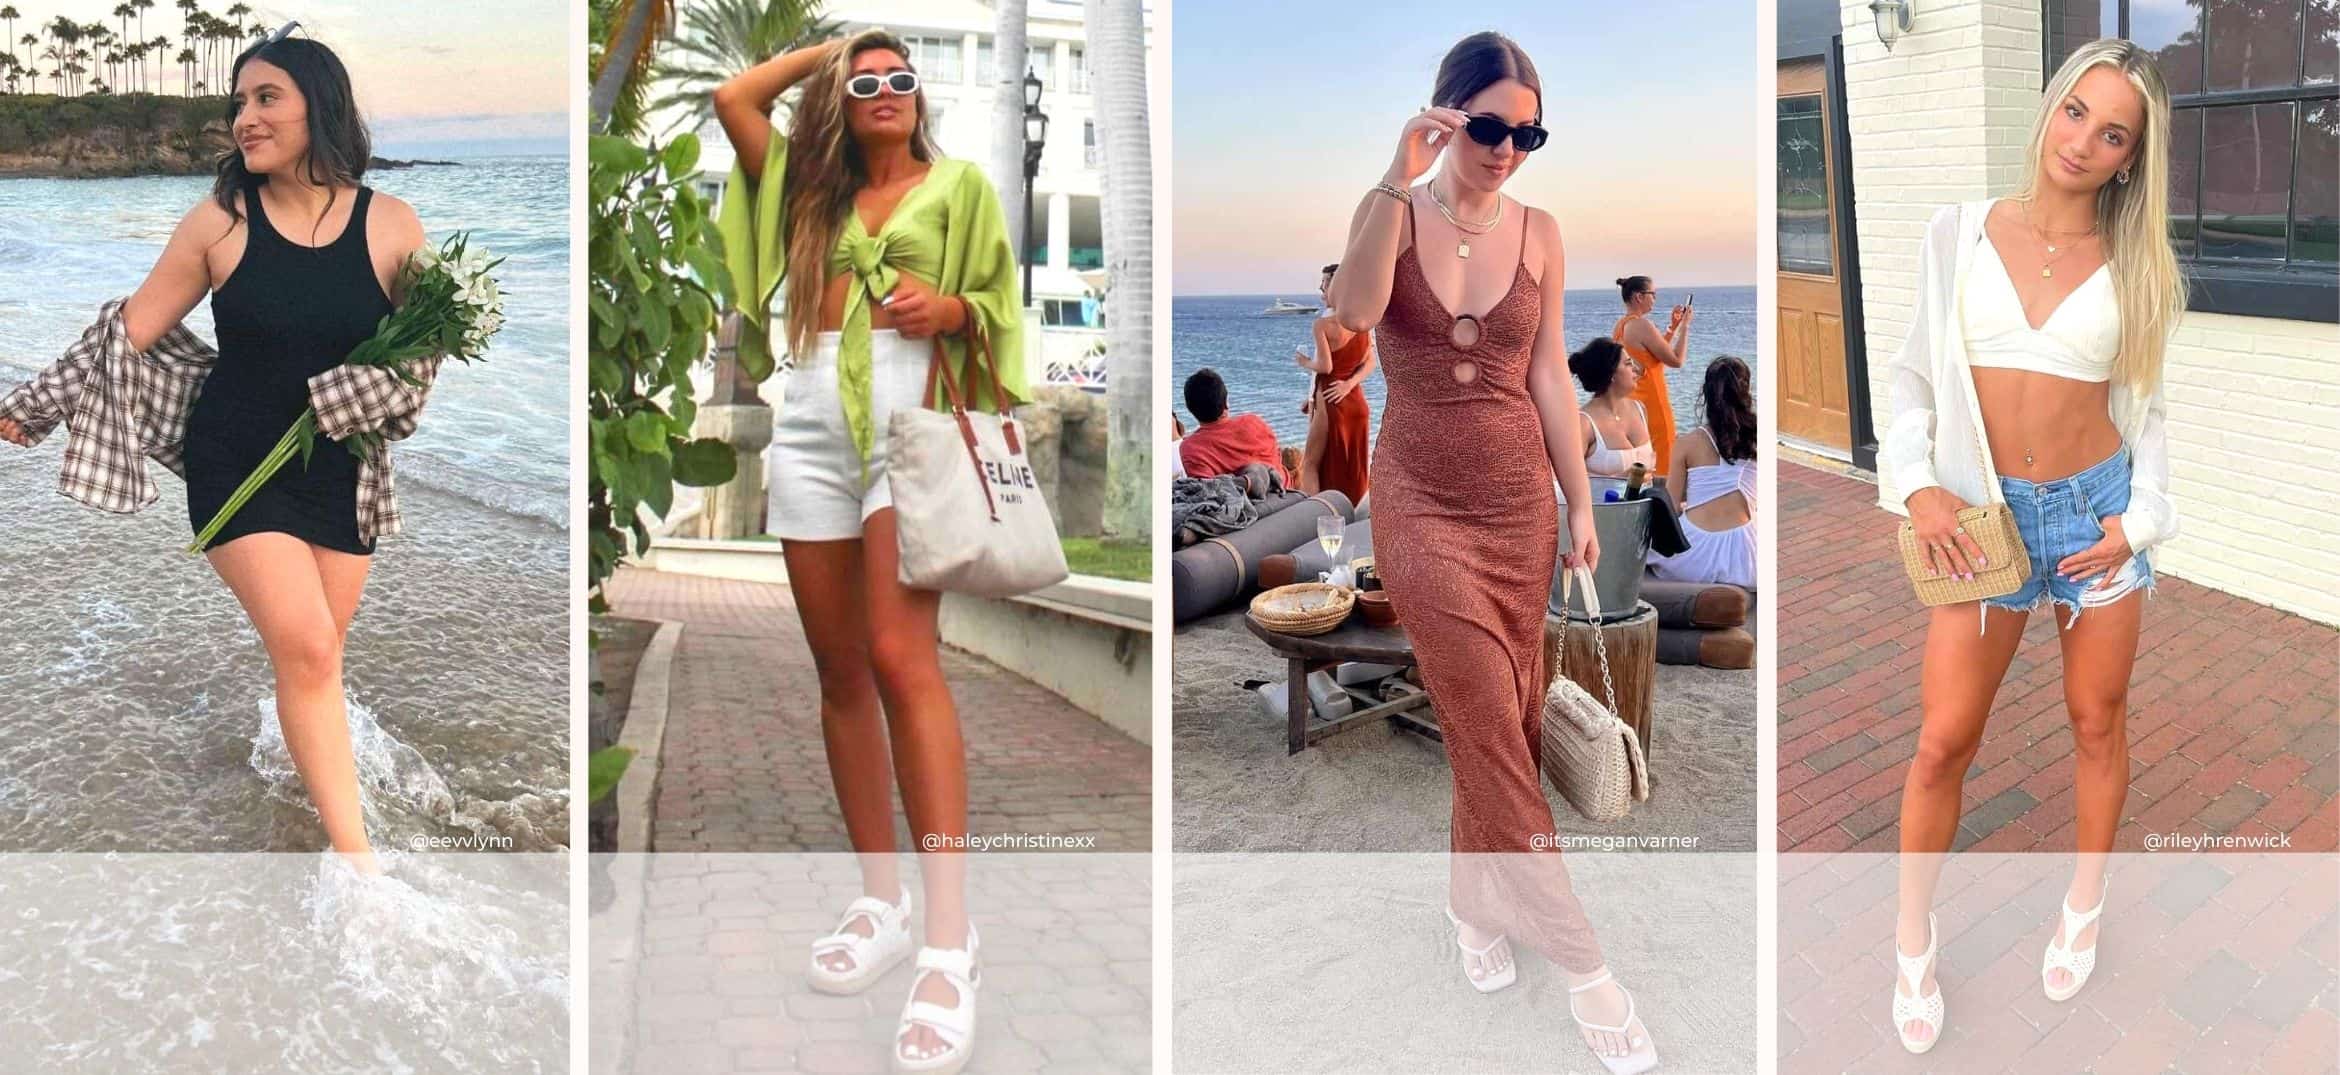 Beach Bonfire Outfit: 7 Stylish Ideas for Ultimate Summer Fun!